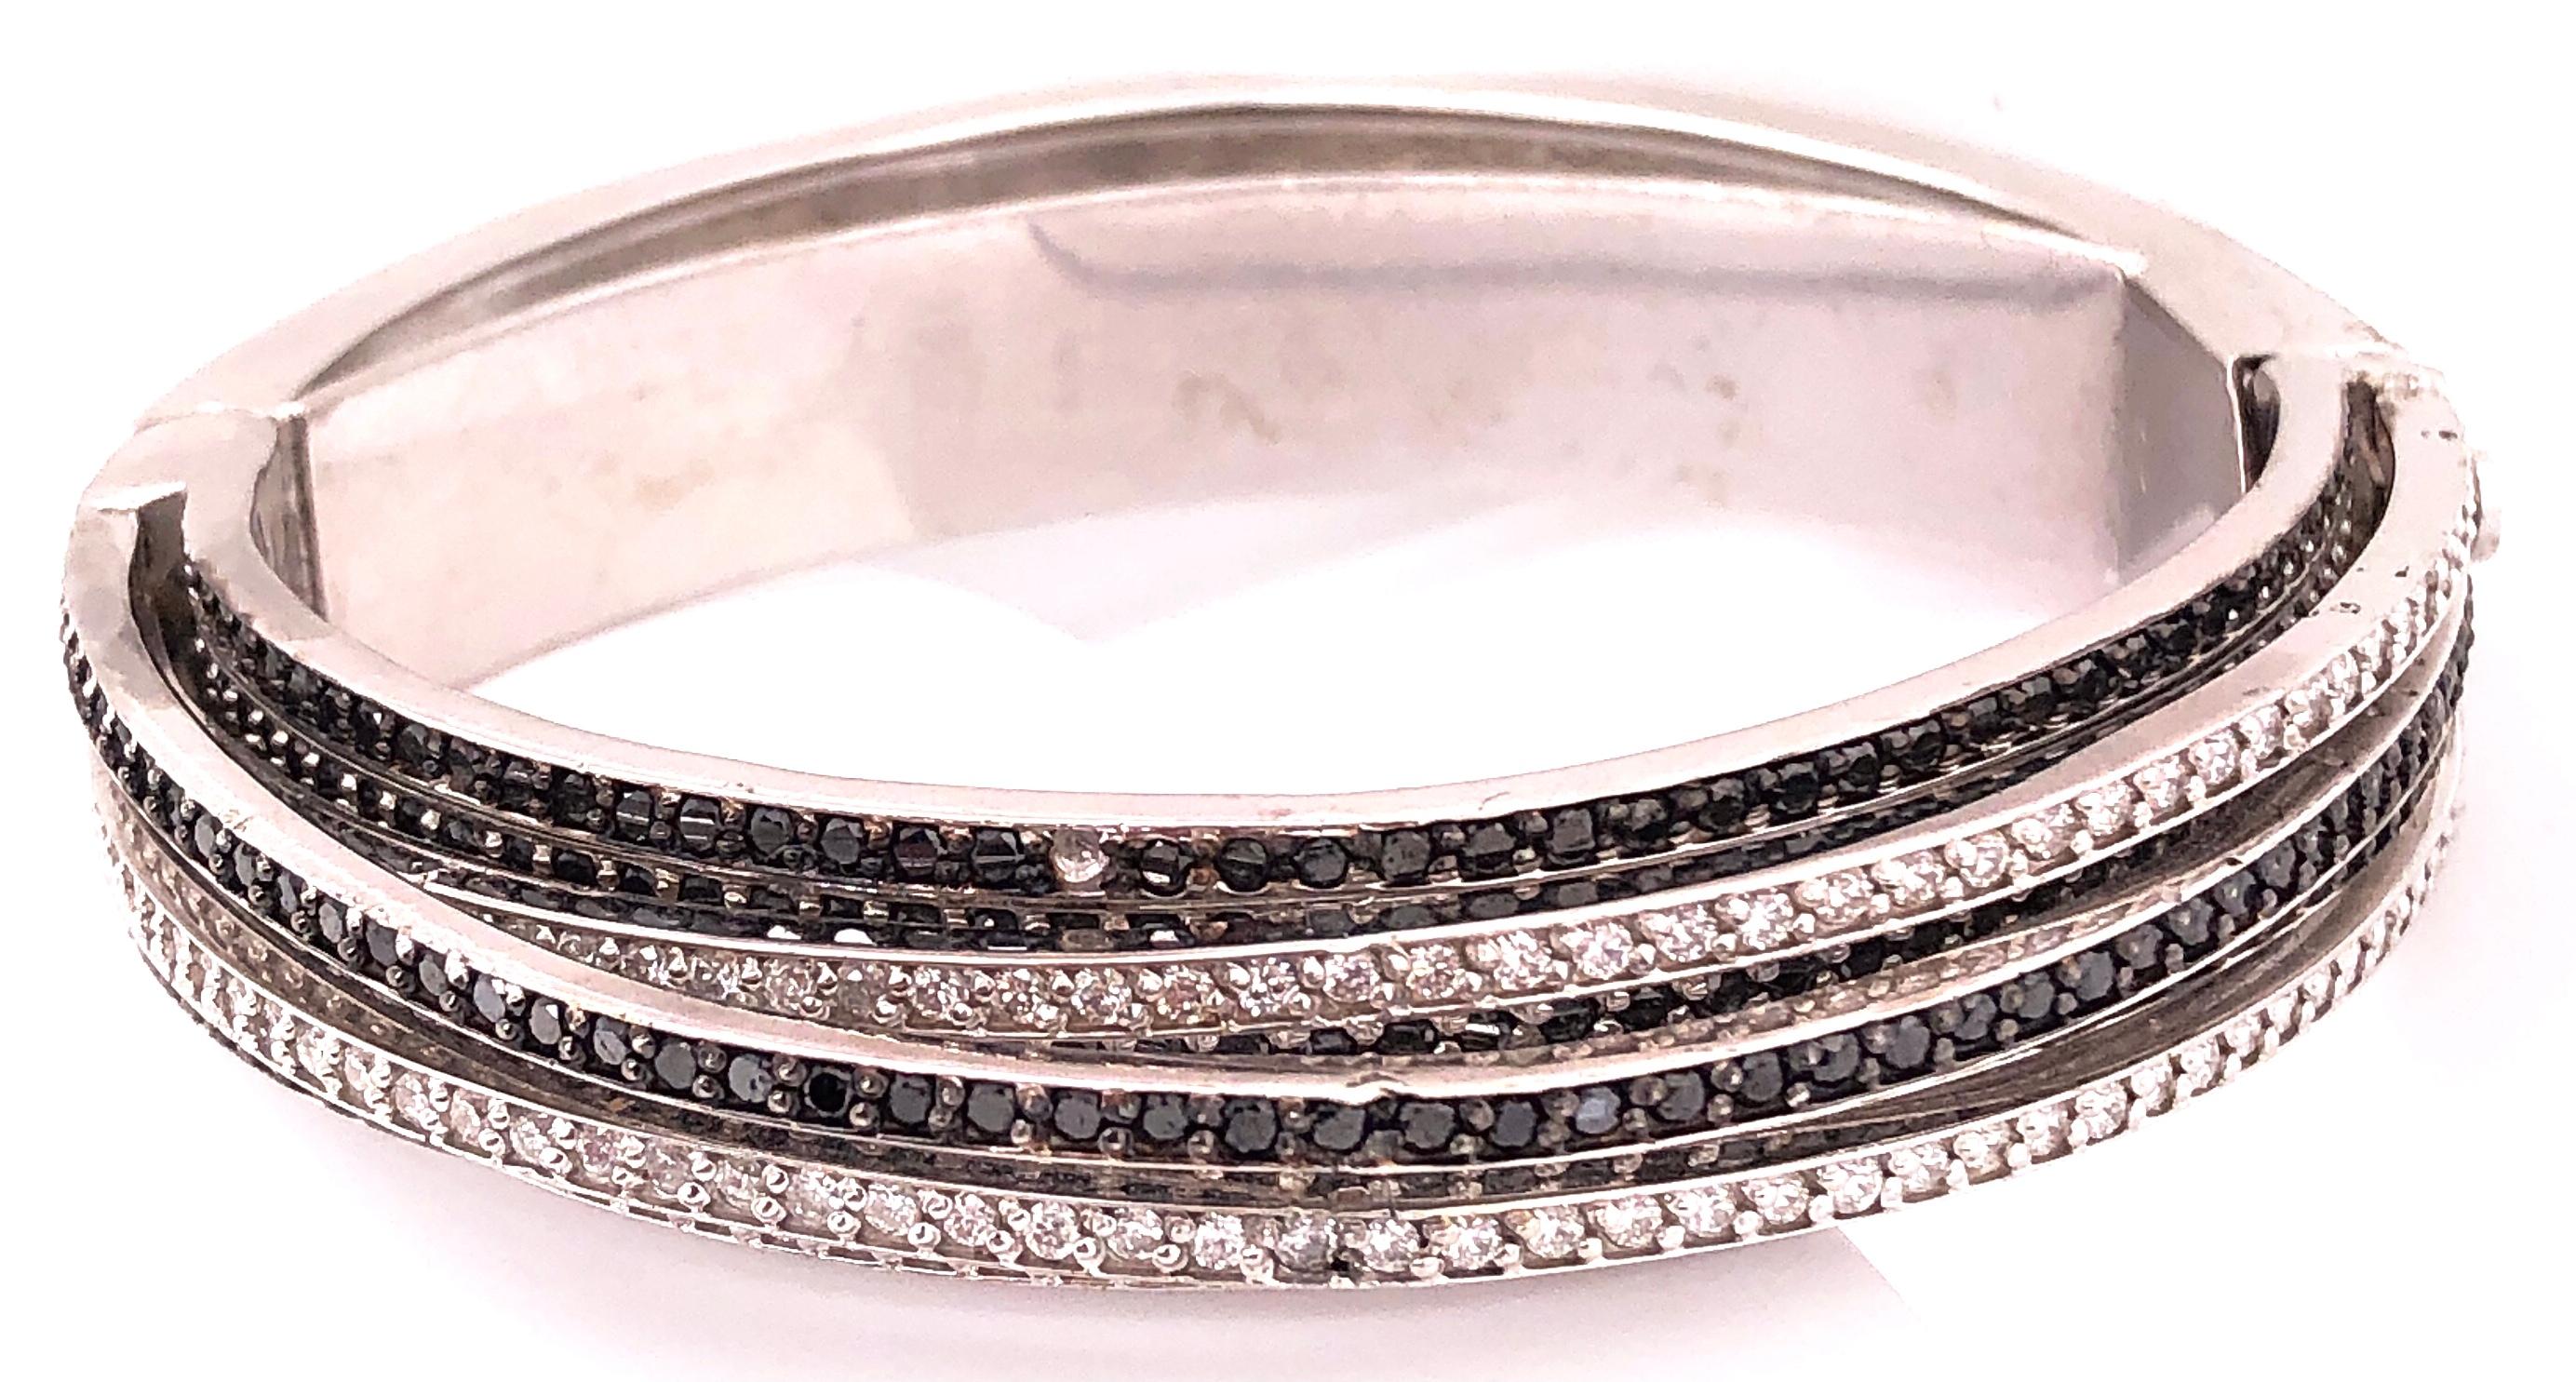 14 Karat After Allegra de Grisogono White Gold Eight-Row Mix Tiered White and Colored Enhanced Black Diamond Bangle. Patent No. 4697315 85 grams total weight. Approx 3 plus Carat Total Diamond Weight. Unsigned. Matching Ring and Earrings sold